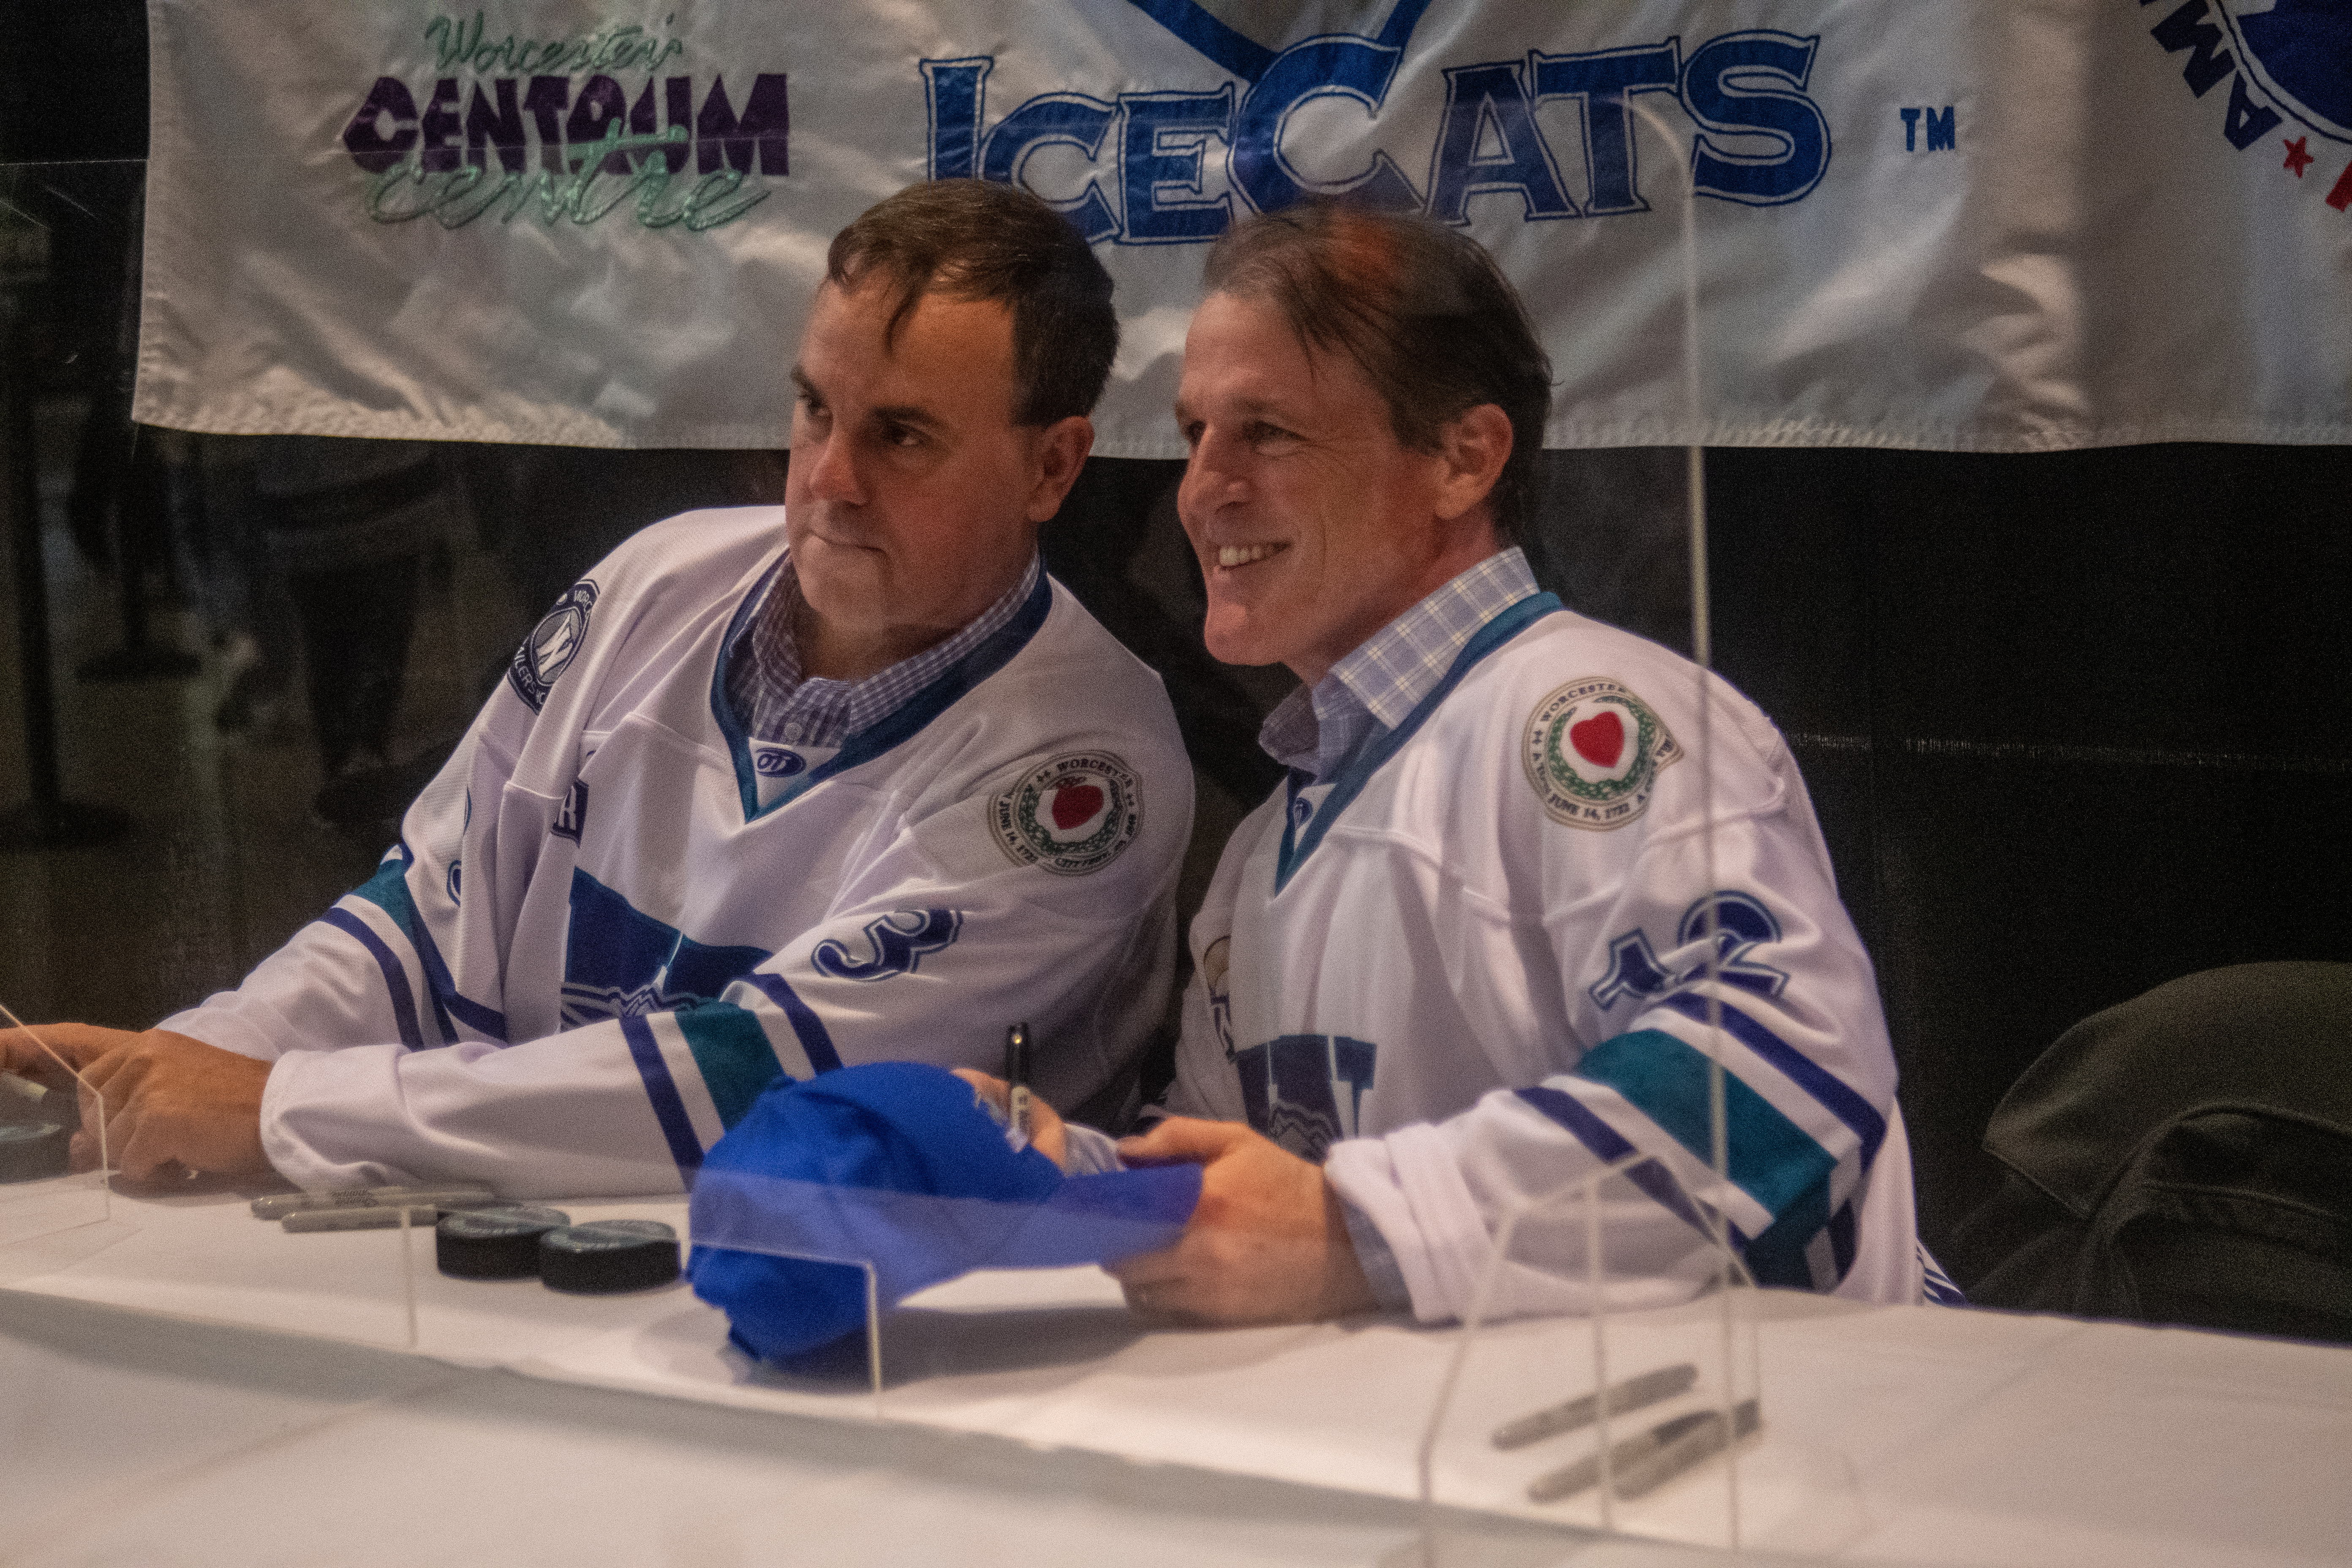 IceCats former players, fans reminisce on city's hockey team at throwback  night Worcester Railers